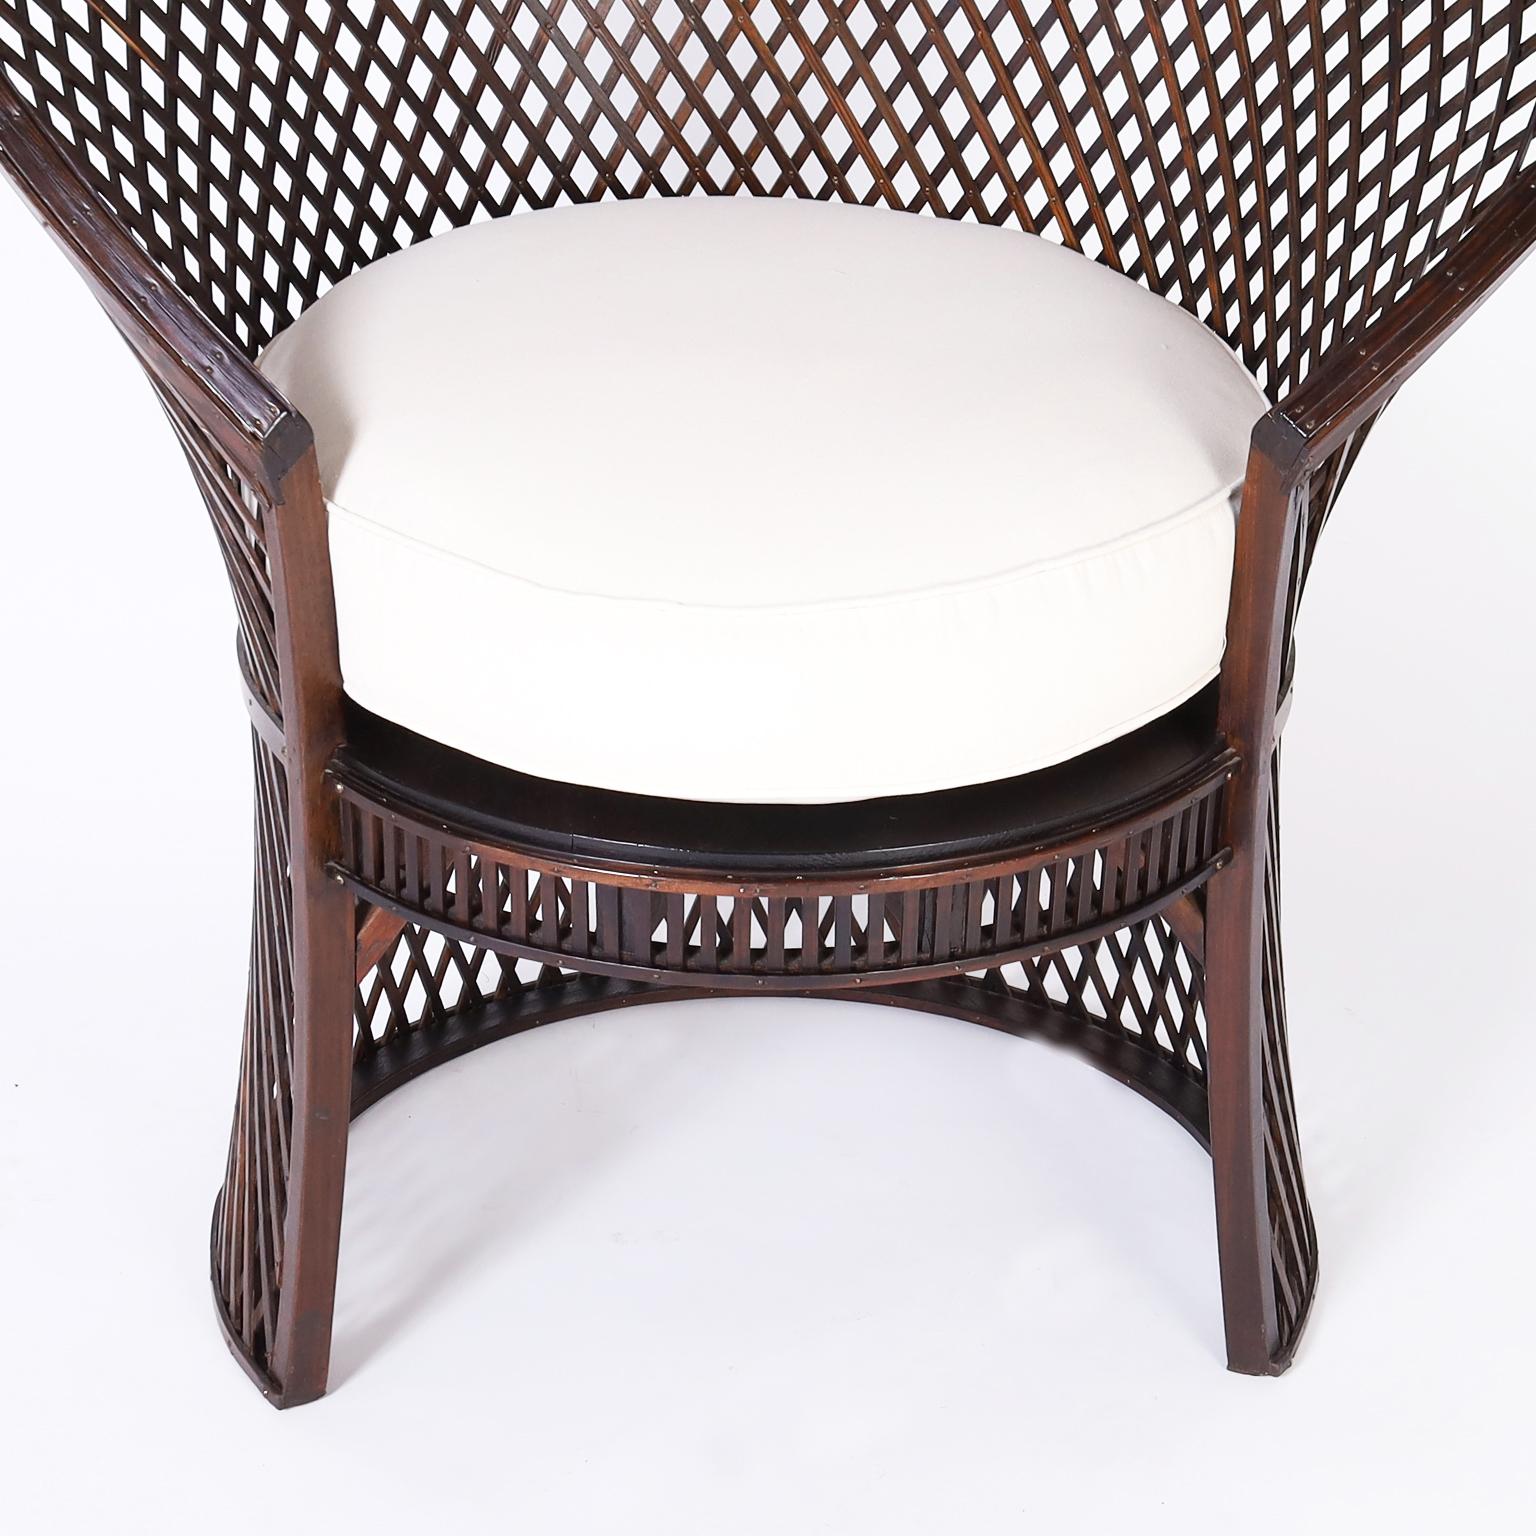 20th Century British Colonial Style Peacock Chair